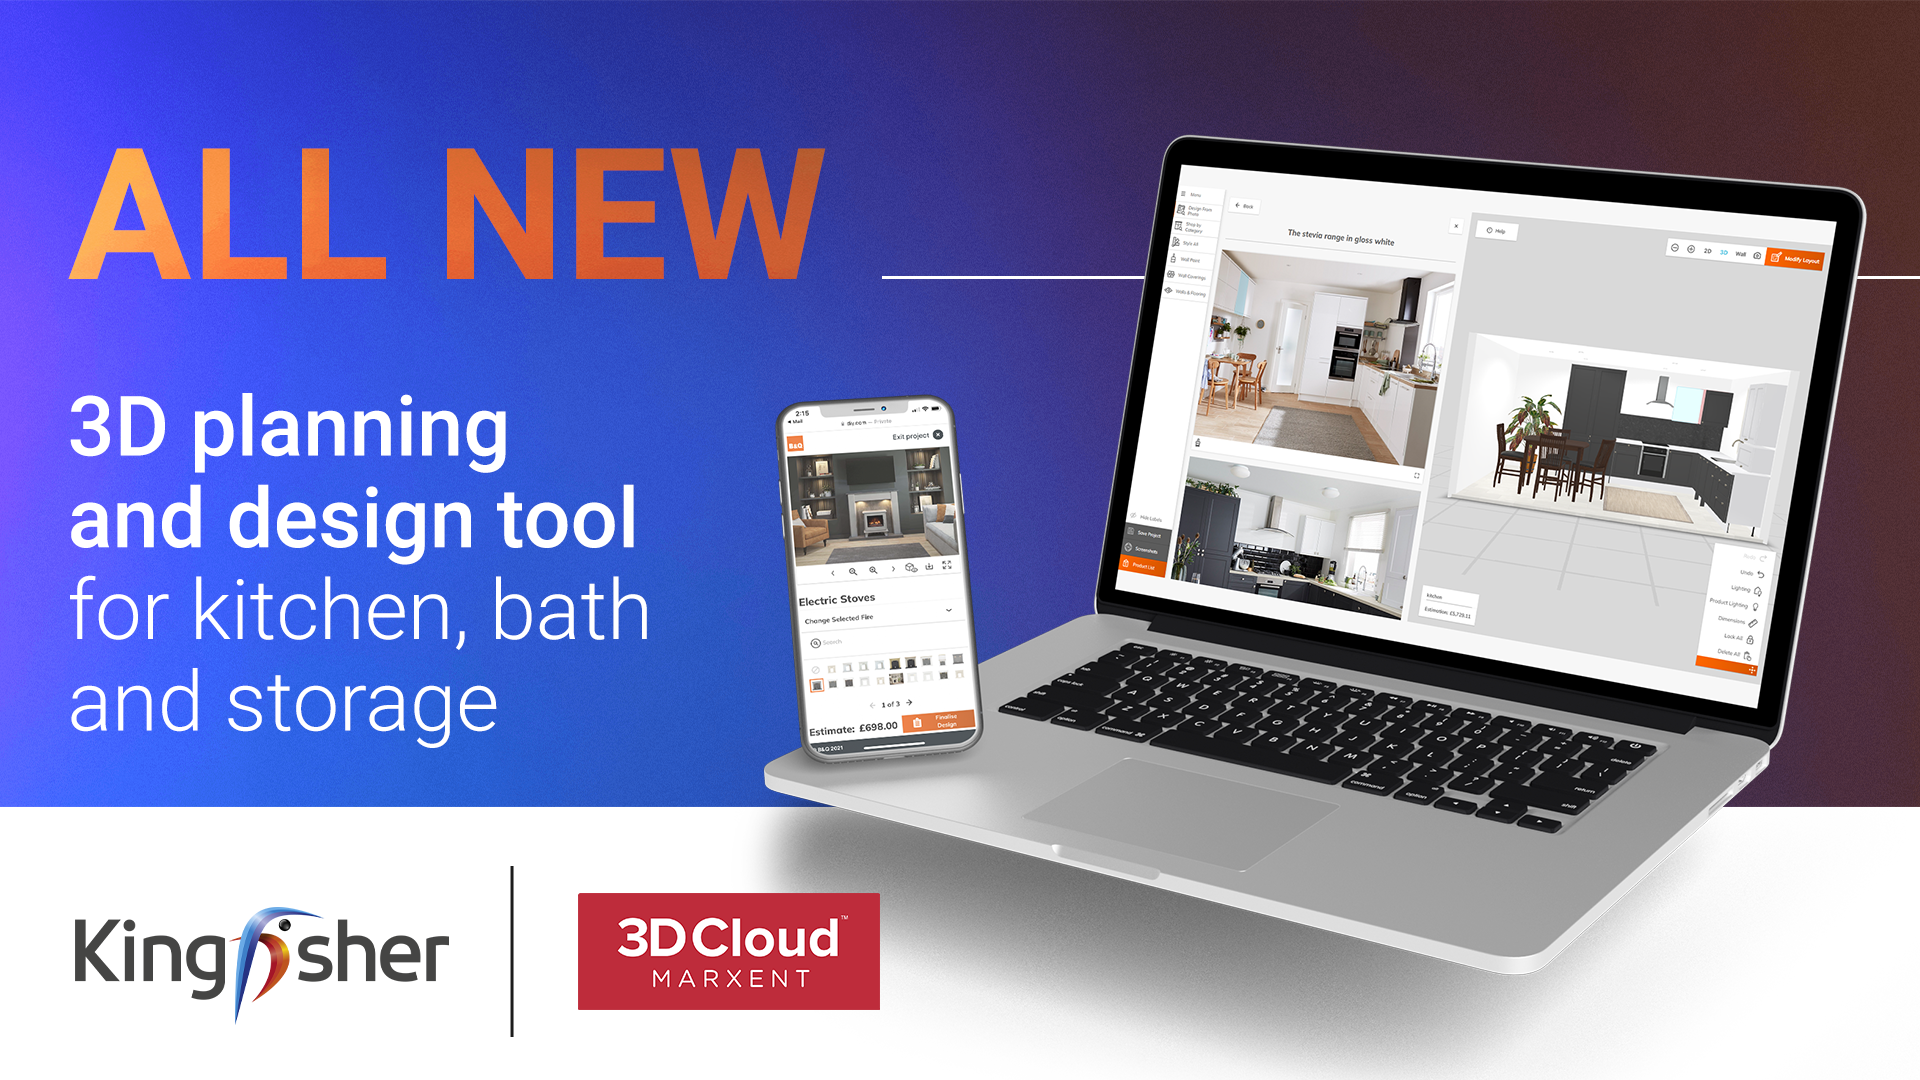 Kingfisher Partners with 3D Cloud™ by Marxent to Deploy Innovative 3D Visualisation Technology